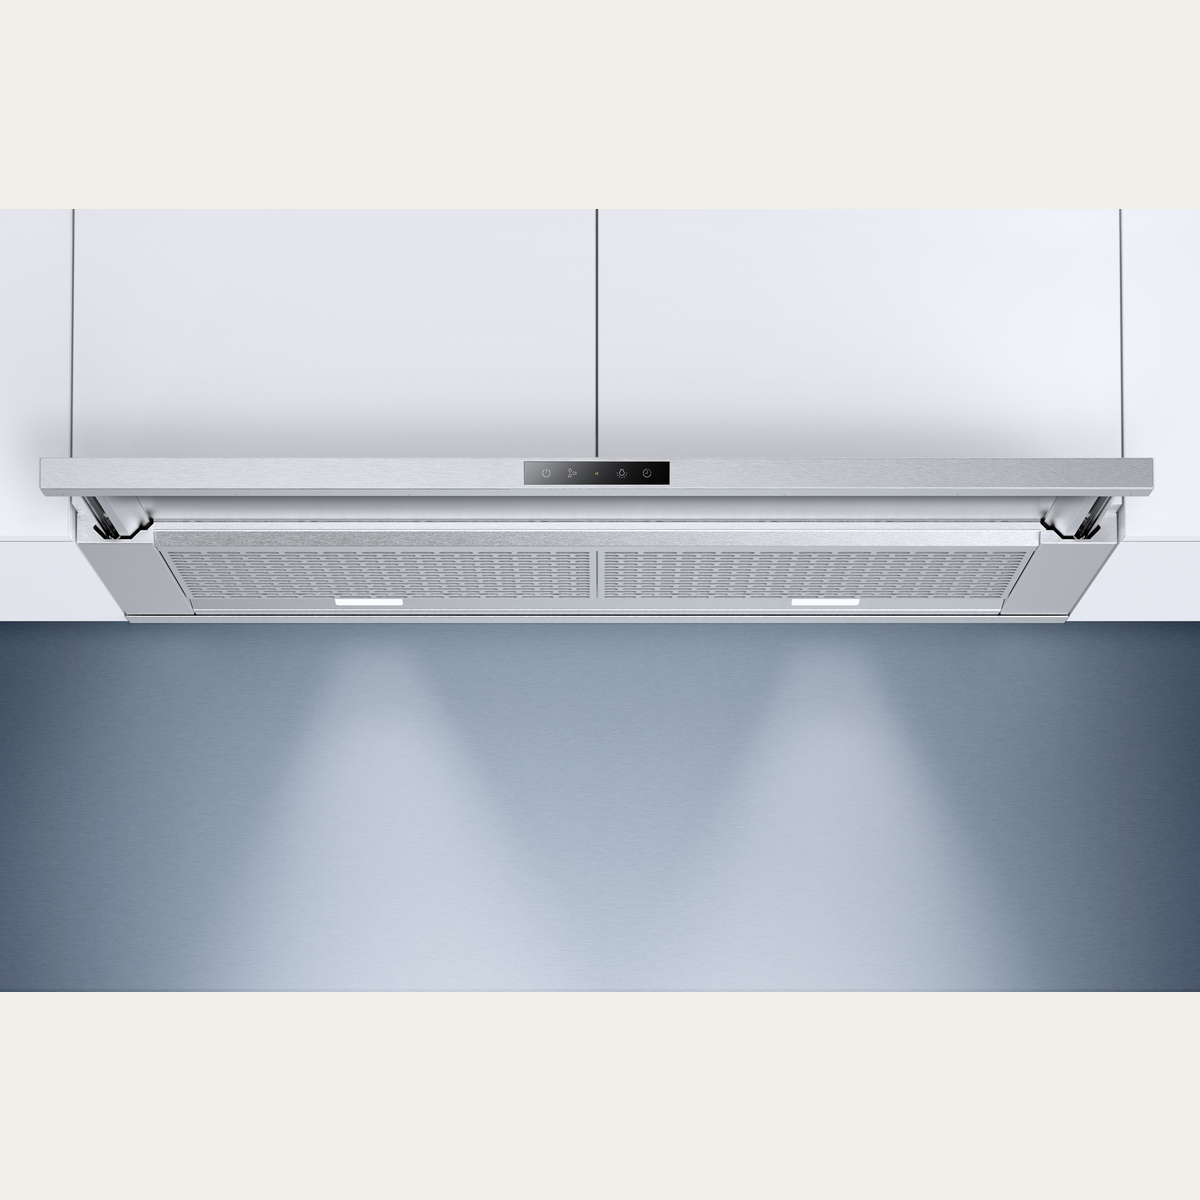 V-ZUG Range hood, AiroClearCabinet V6000, Standard width: 60.0 cm, ChromeClass, OptiLink, Energy efficiency rating: A+, Extracted air, TouchControl, integrated range hood, flat pullout